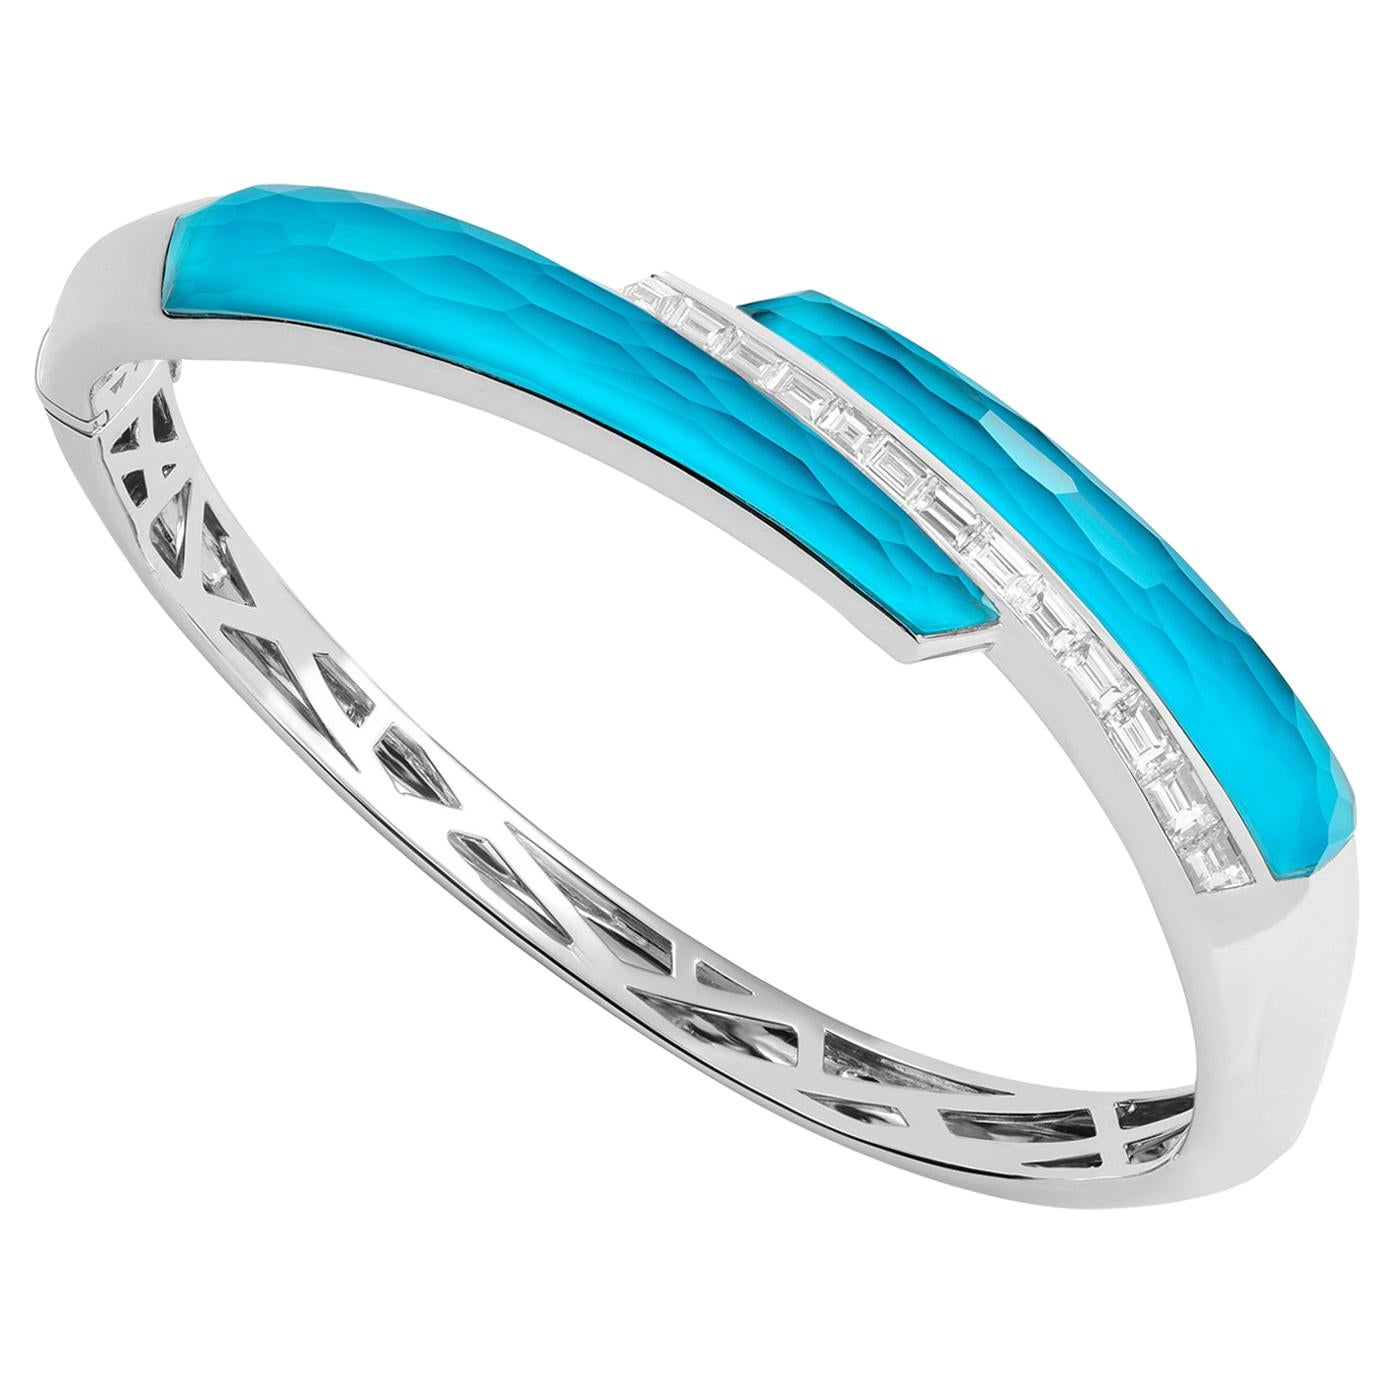 Stephen Webster CH₂ Turquoise Crystal Haze and White Diamonds Shard Bangle